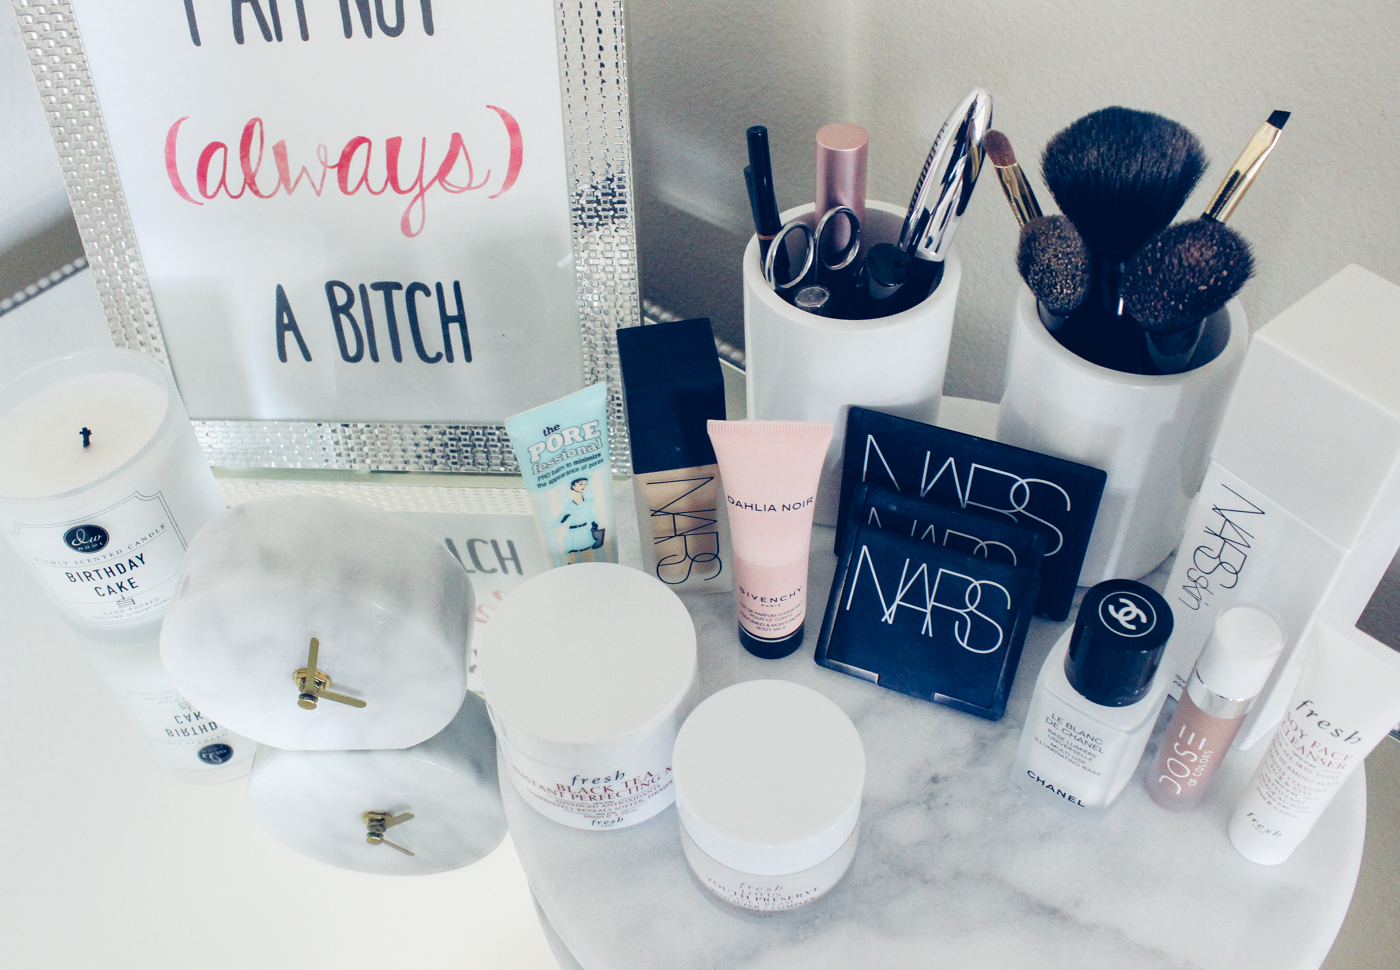 Blondie in the City | Marble Bathroom Styling | Makeup Products, NARS Makeup | Chanel Makeup | Black and White Bathroom Decor | White Marble Clock | White Marble Lazy Susan